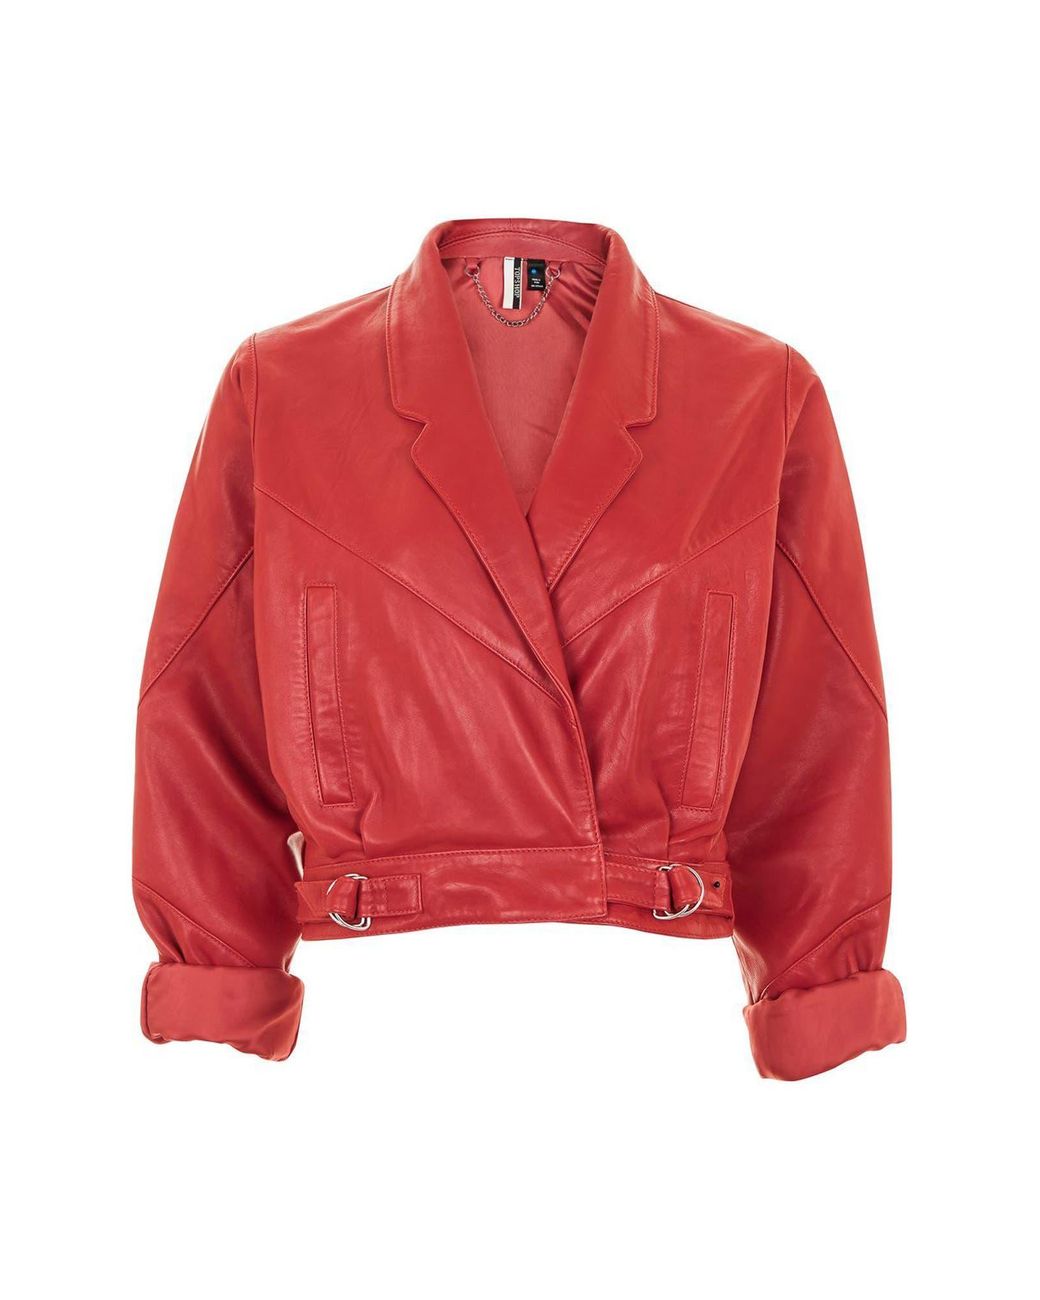 TOPSHOP maggie Cropped Leather Jacket in Red | Lyst